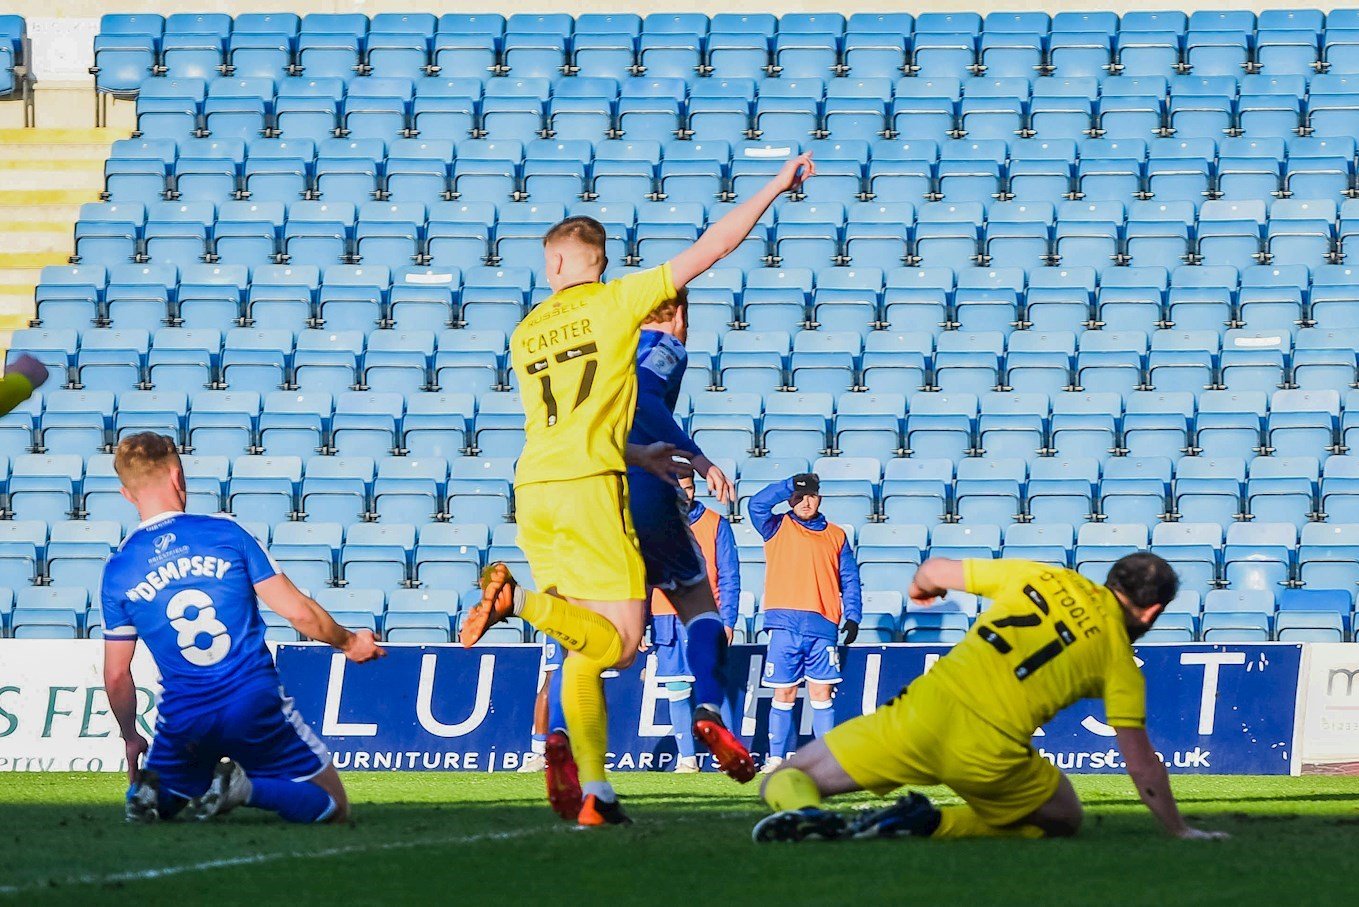 Hayden Carter celebrates his winning goal for Burton Albion against Gillingham - only our third league win of the season